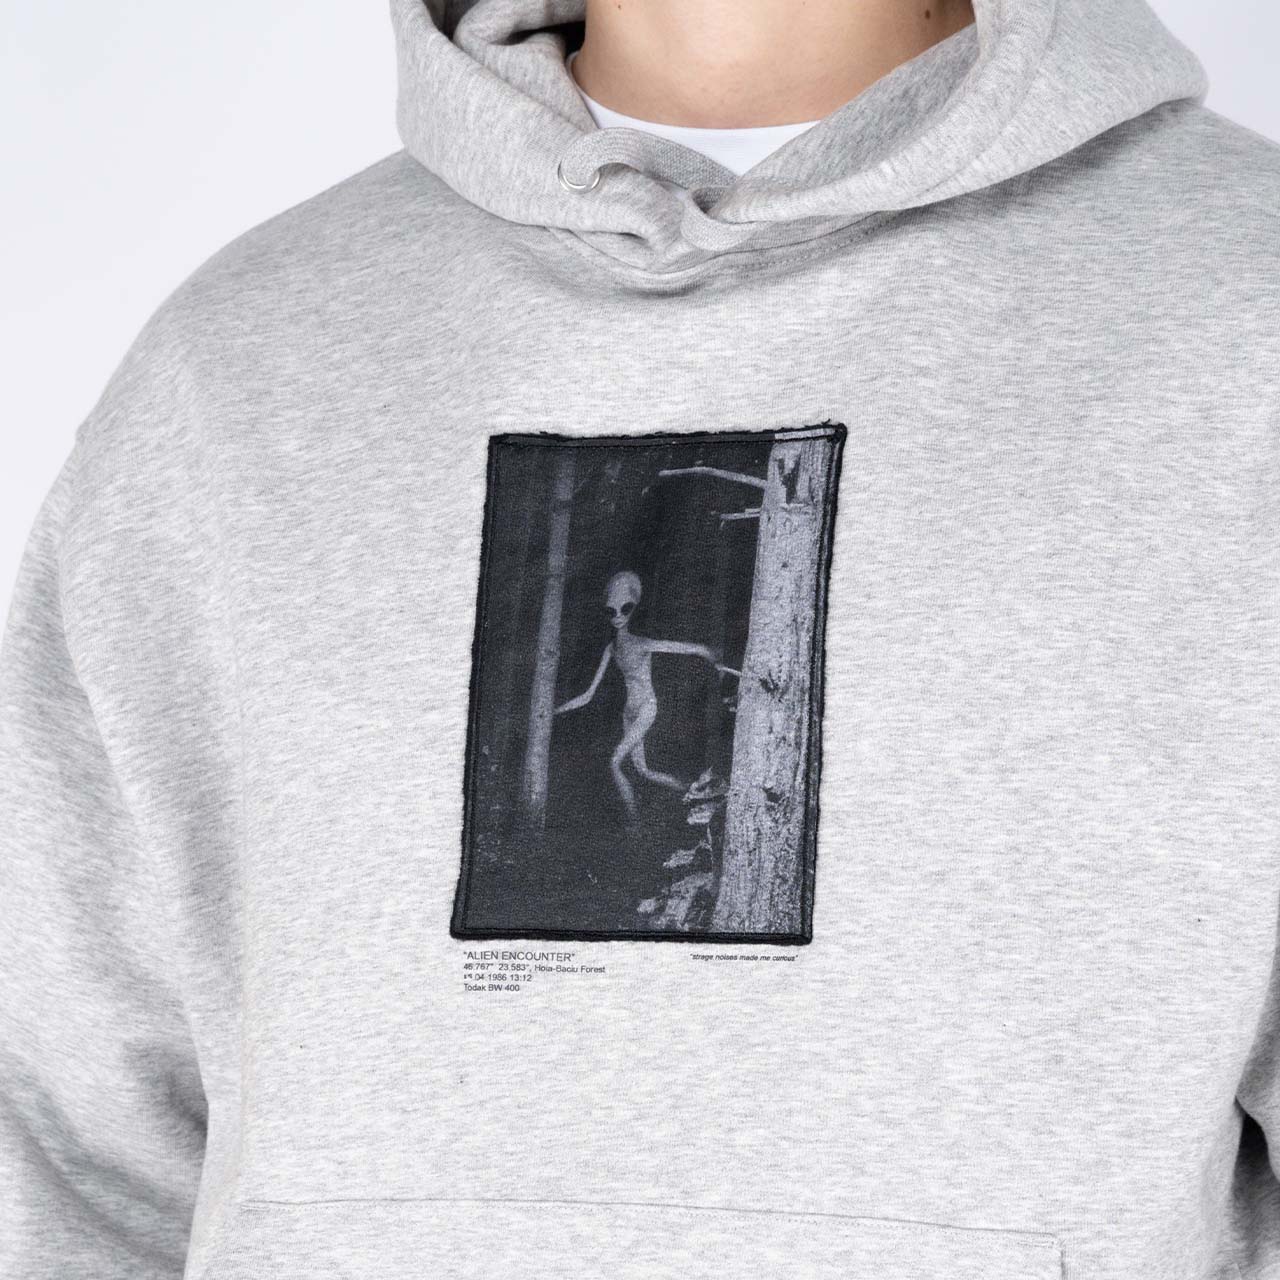 Snash - Paranormal Investigator "Patched" Hoodie